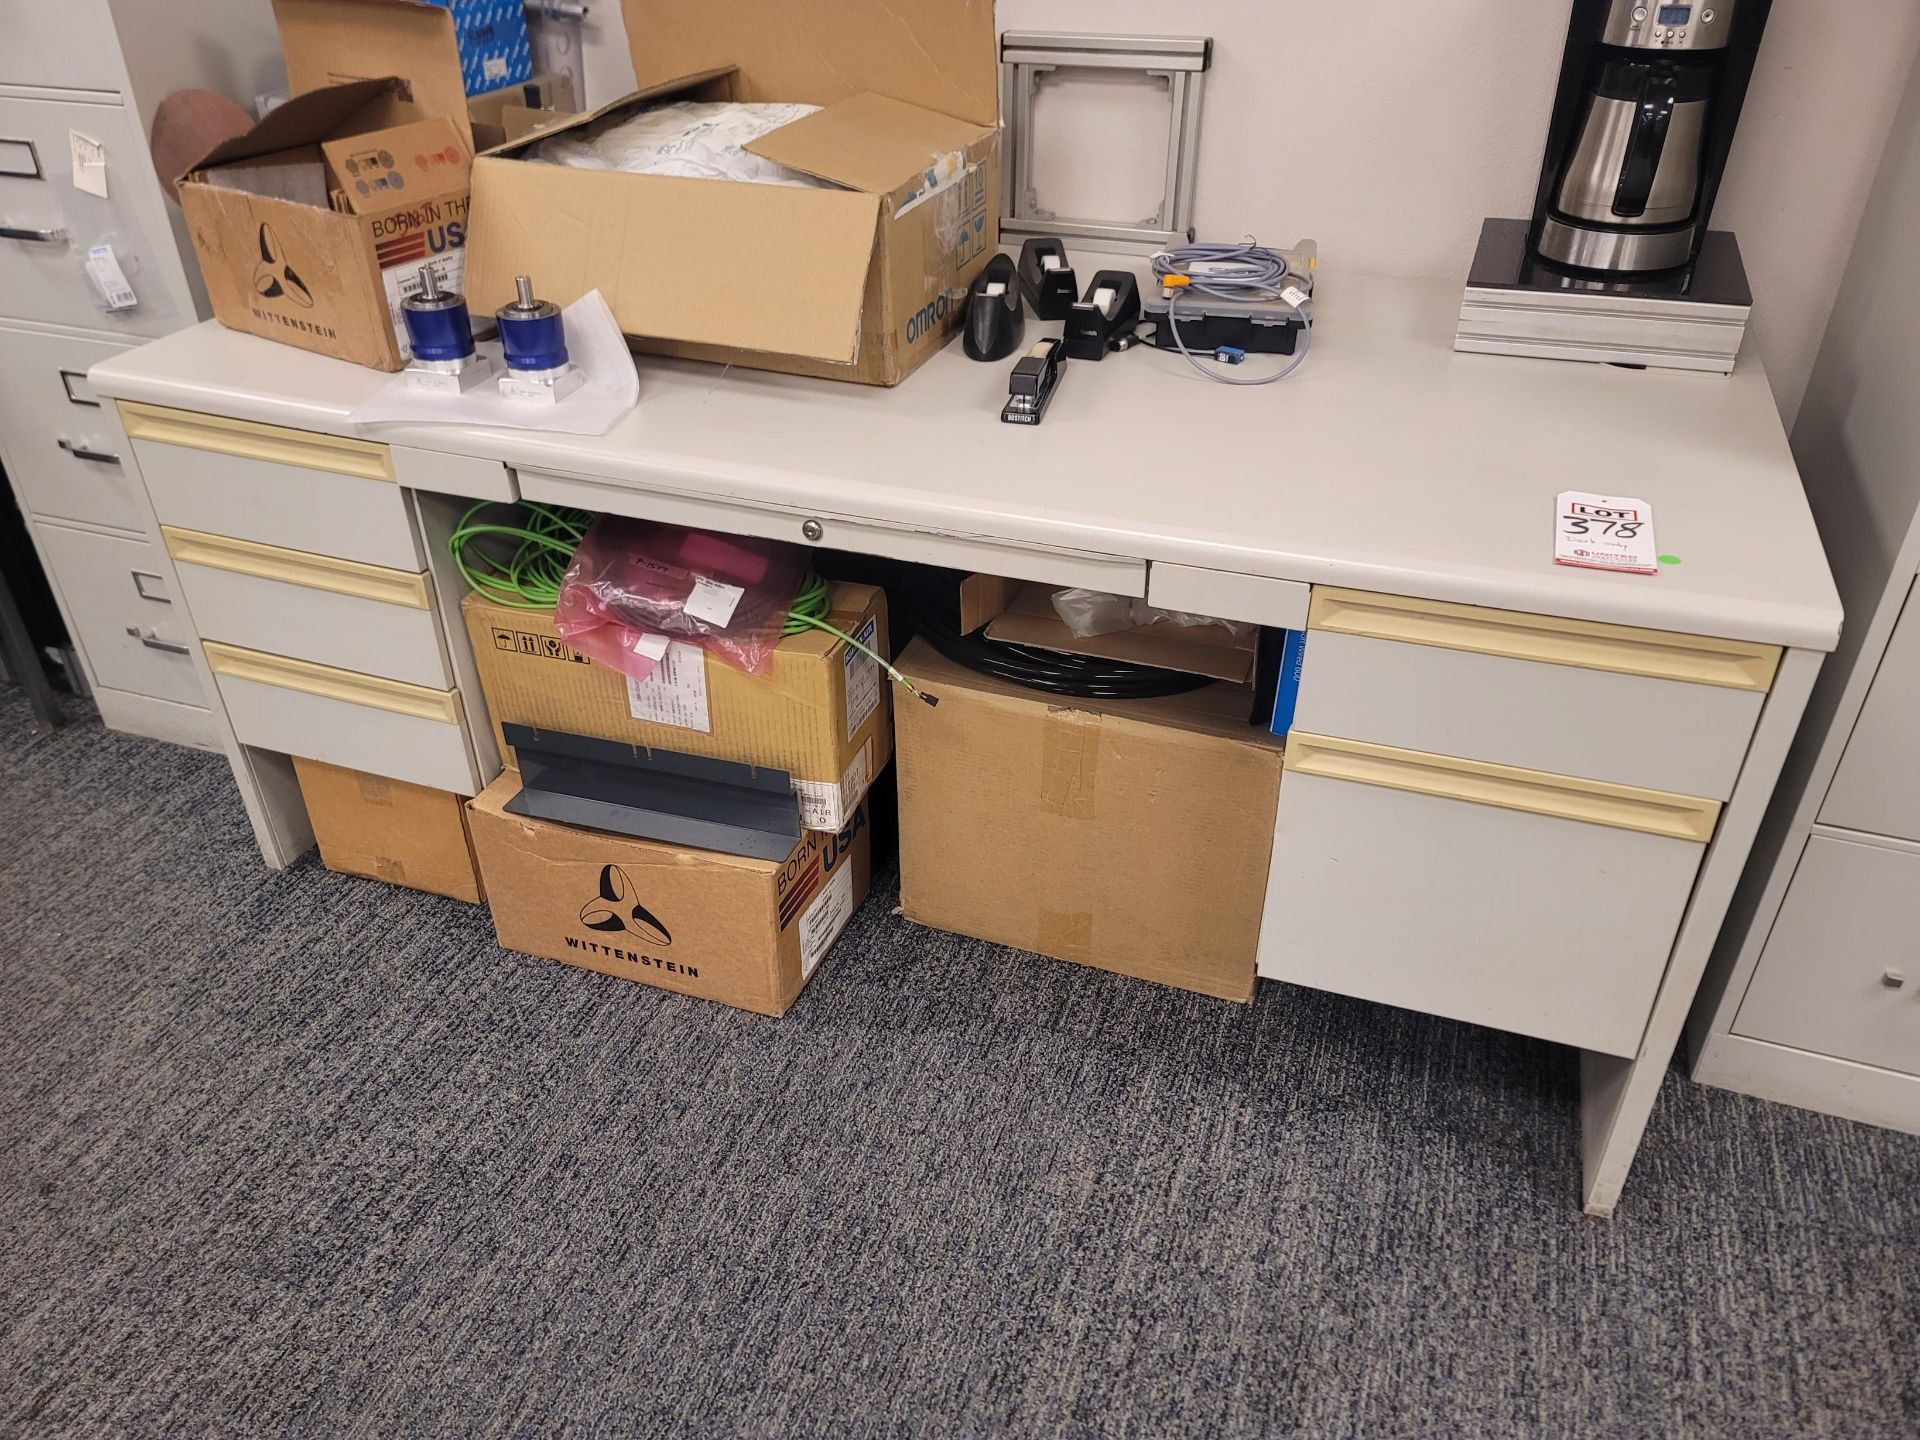 OFFICE DESK, 6' X 3', CONTENTS NOT INCLUDED